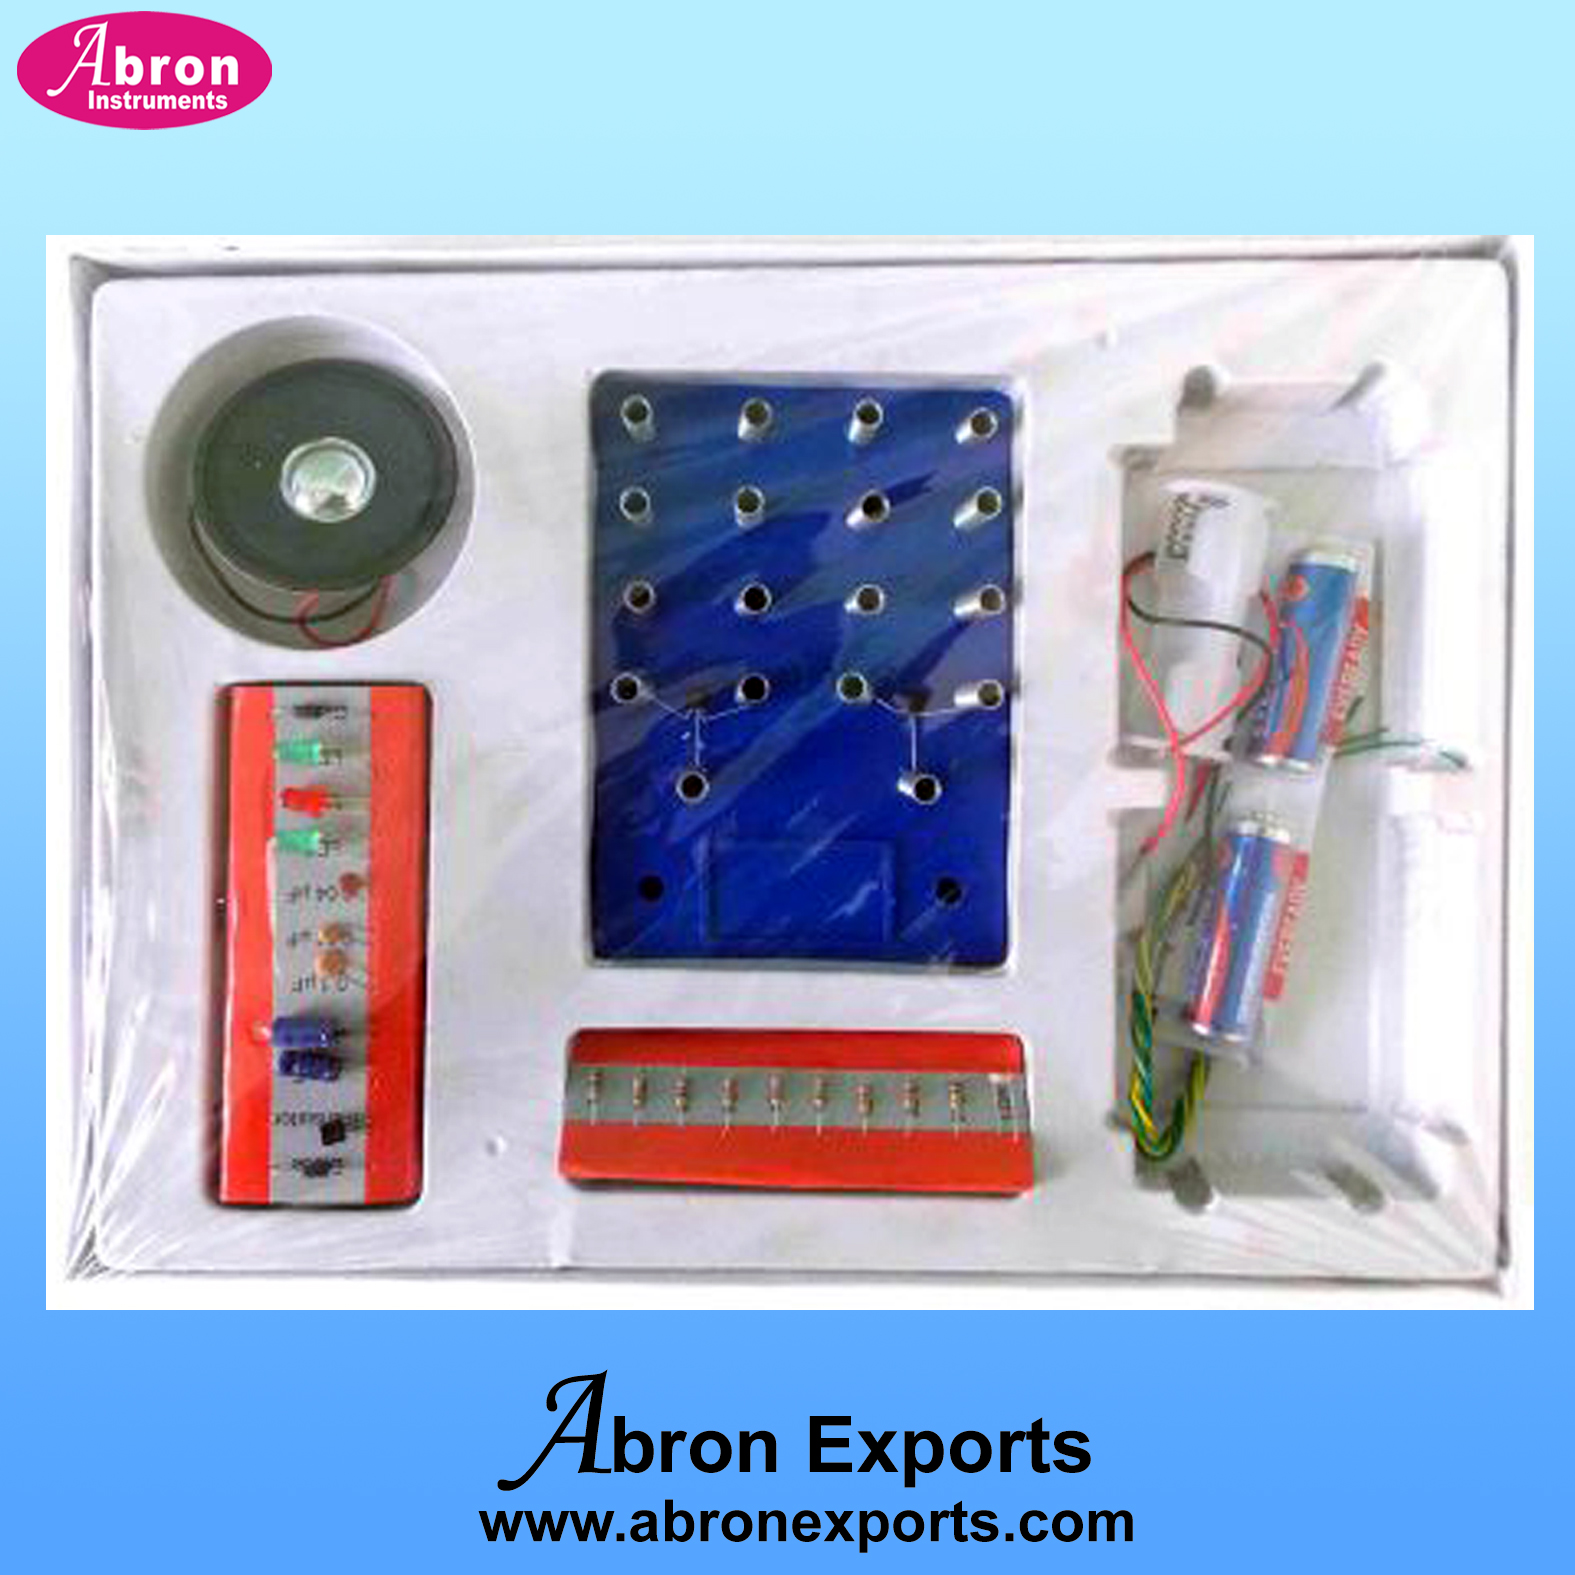 Electronic component abron kit circuit spare loose basic circuit spare AE-1224K2